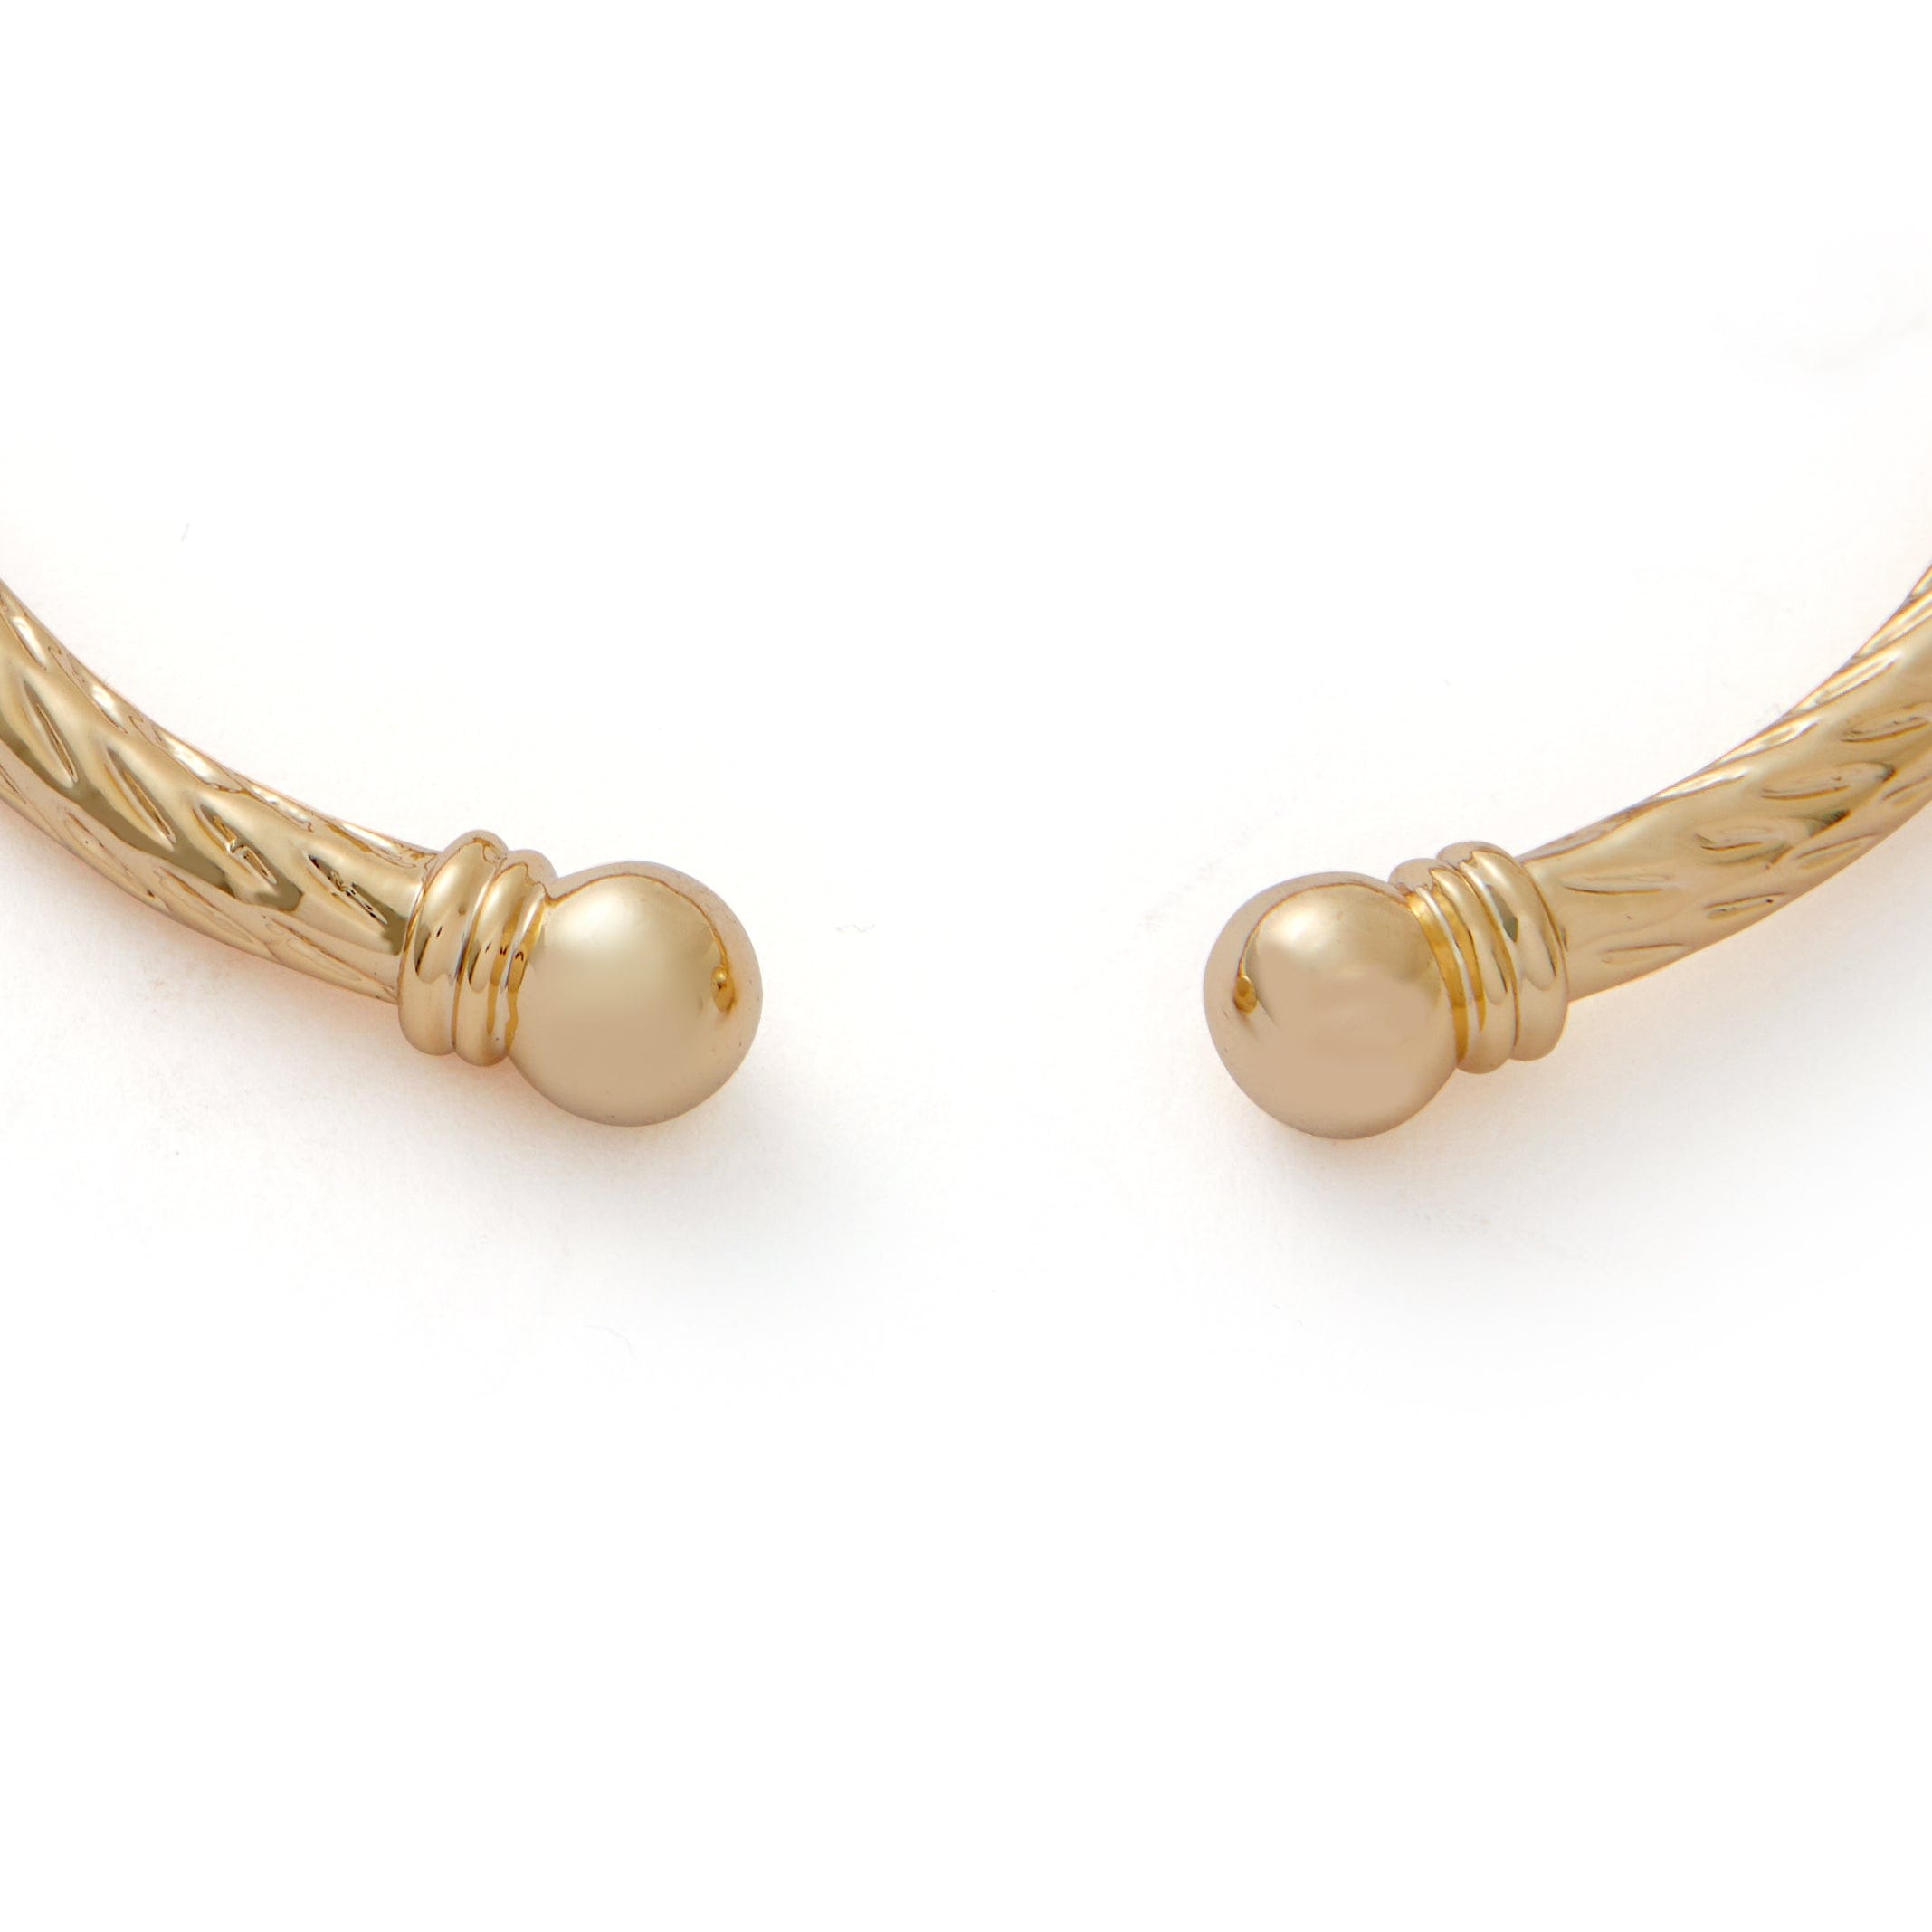 Close-up of Gold Ball Torque Bangle in Kids and Adult Sizes